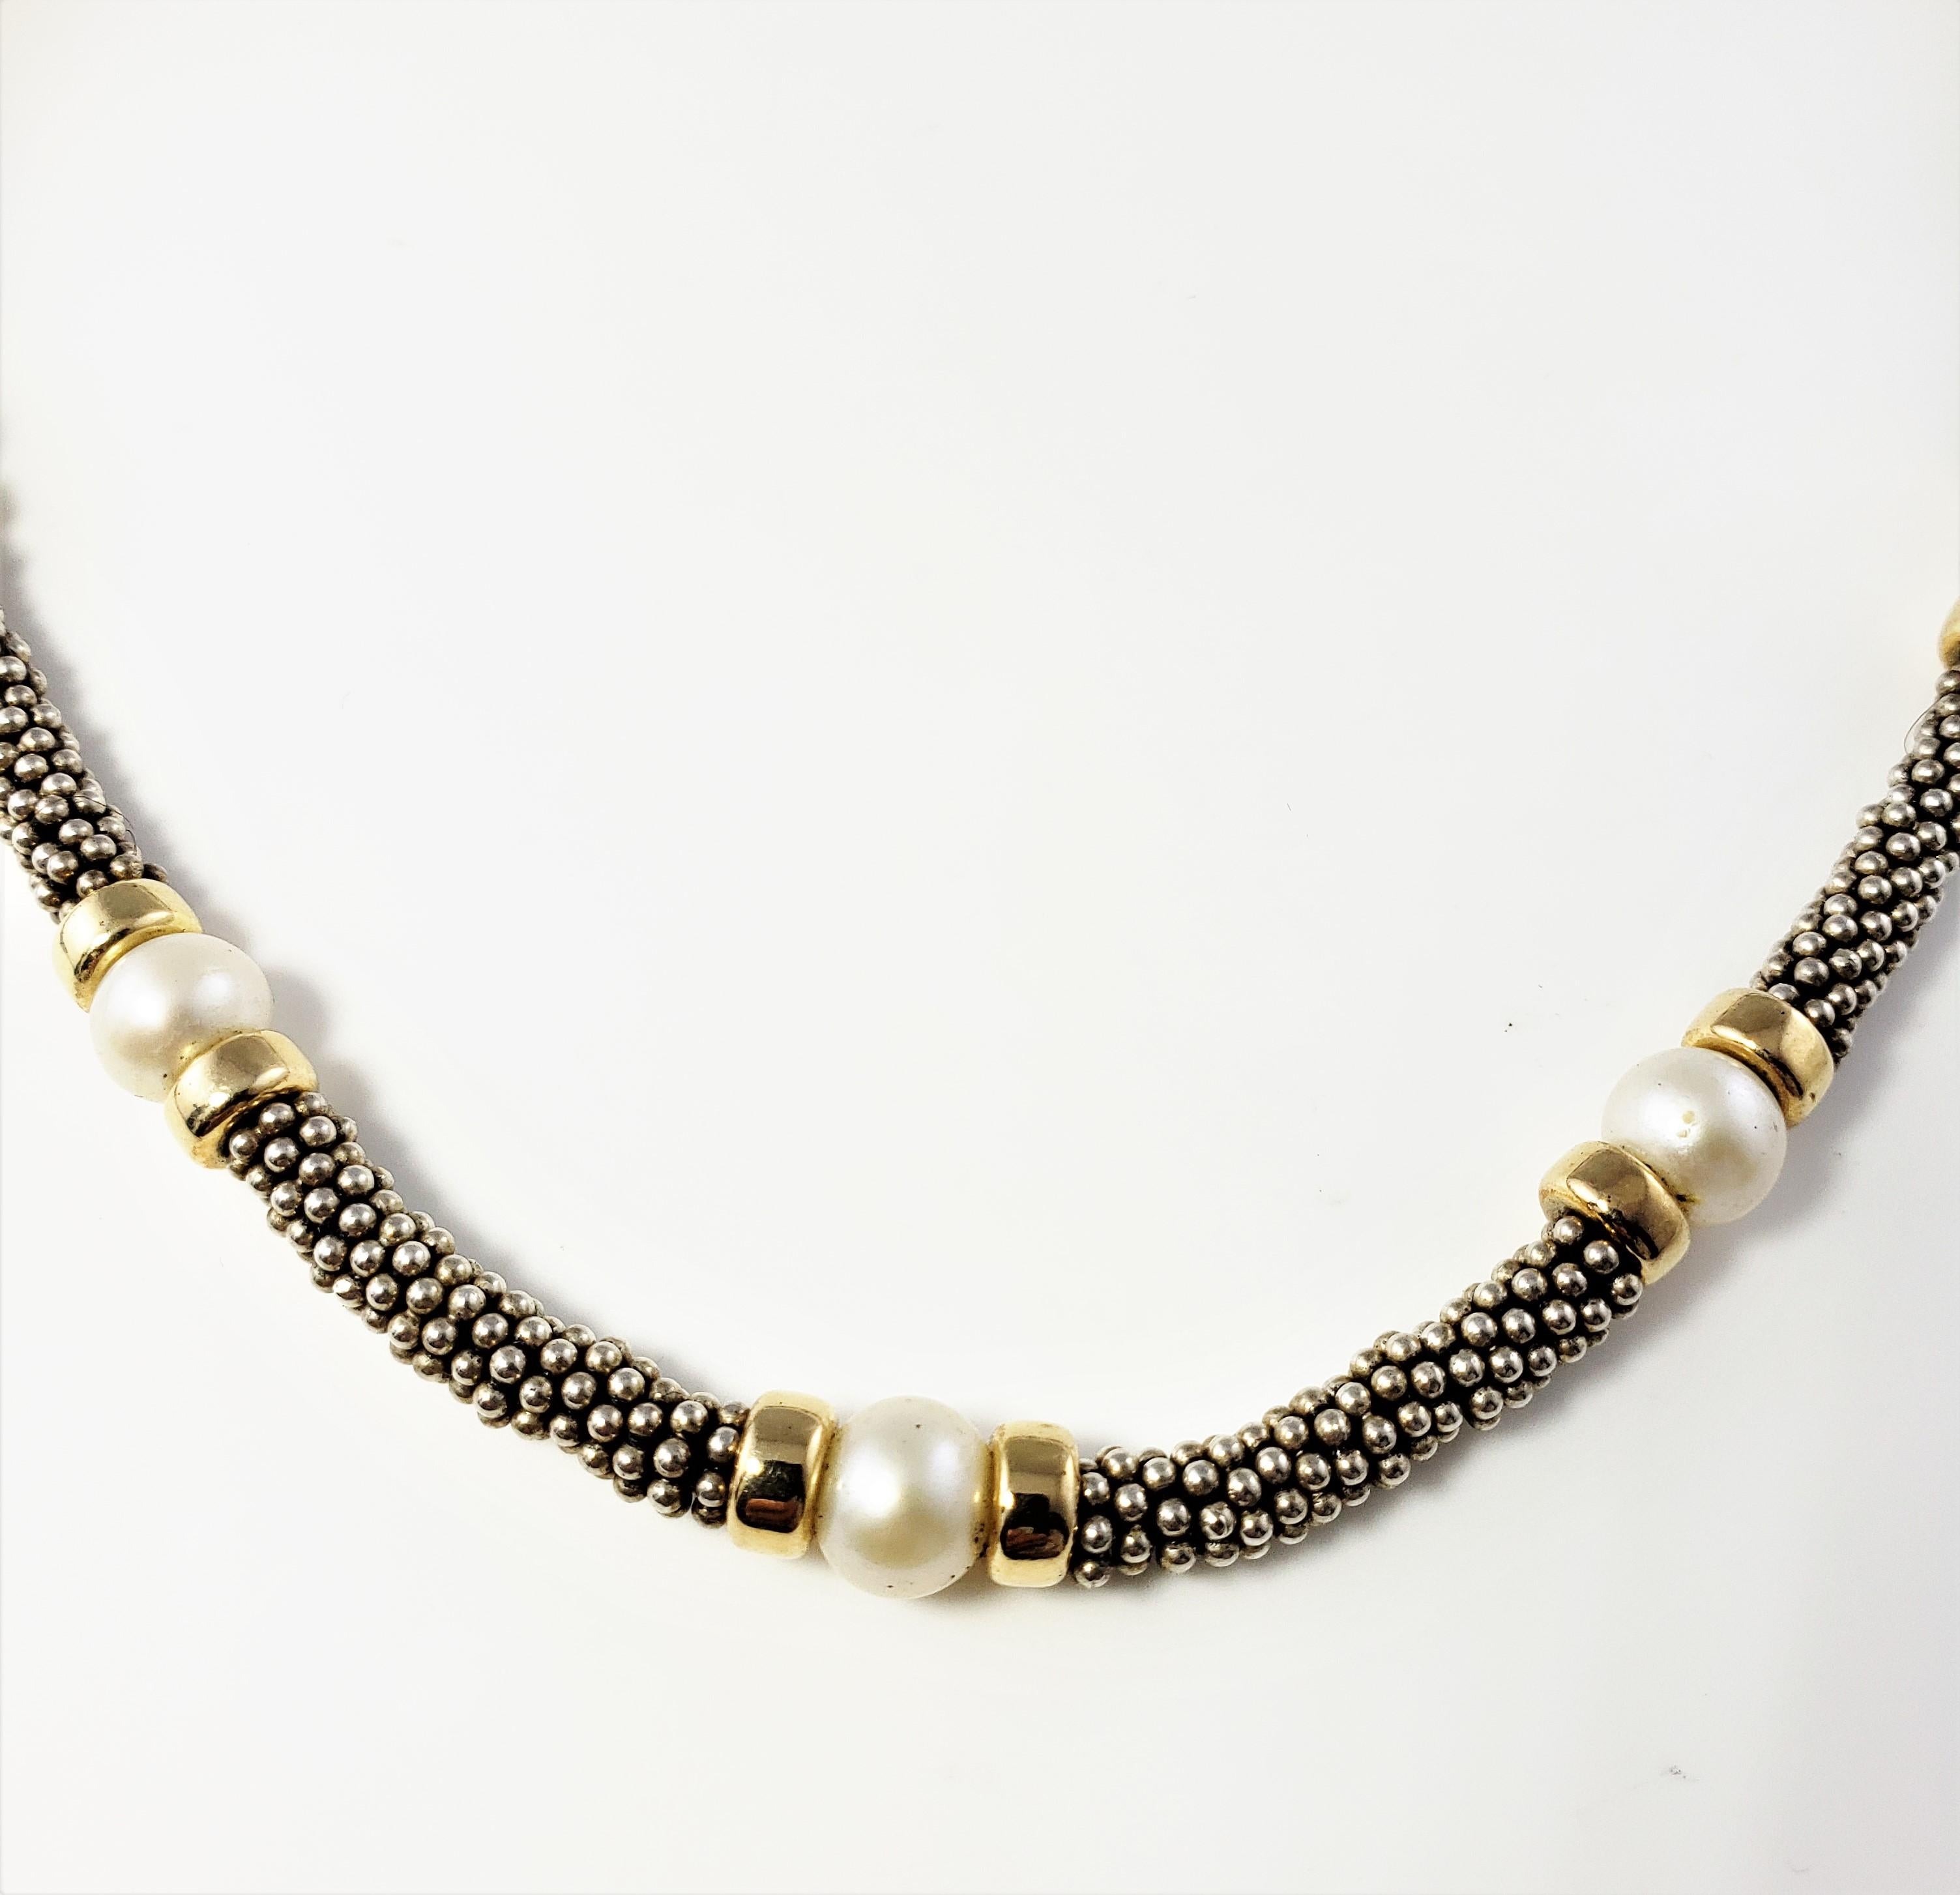 Vintage Deborah Armstrong Co. Sterling Silver, 18K Yellow Gold and Pearl Necklace-

This elegant toggle necklace nine cultured pearls (7 mm each) set in beautifully detailed sterling silver and 18K yellow gold. Necklace width: 5 mm.

Size: 16.5